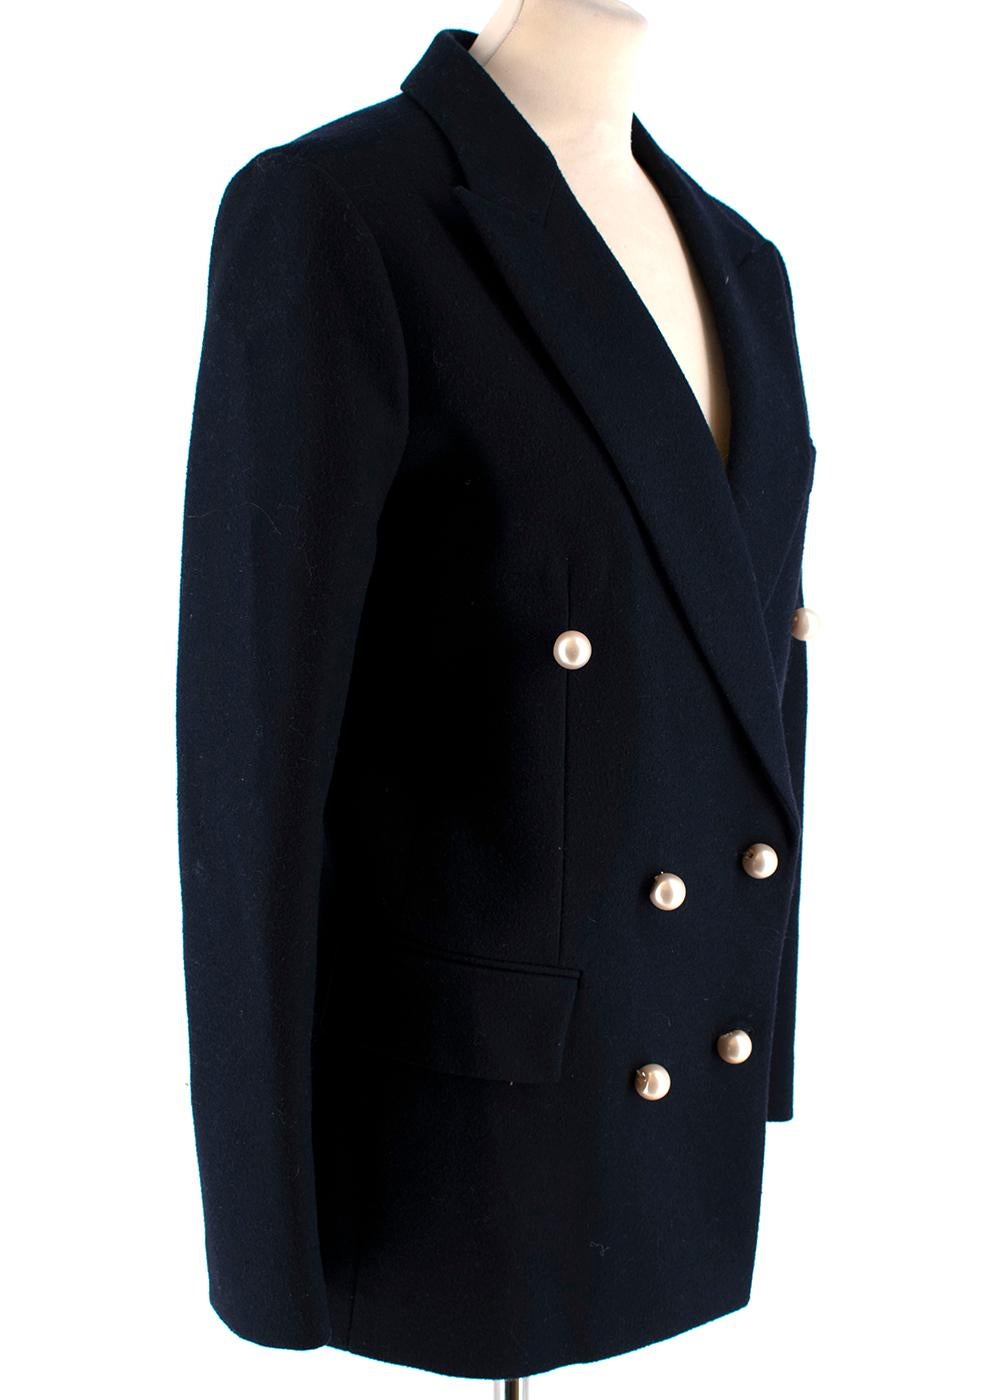 Celine Navy Classic Jacket

- Faux-pearl chunky buttons
- Double Breasted fastening
- Revere collar
- Patch pockets
- Semi-structured shoulders
- Silk blue lining
- Warm material for the winter

Fabric Composition: 100% Wool

Made in